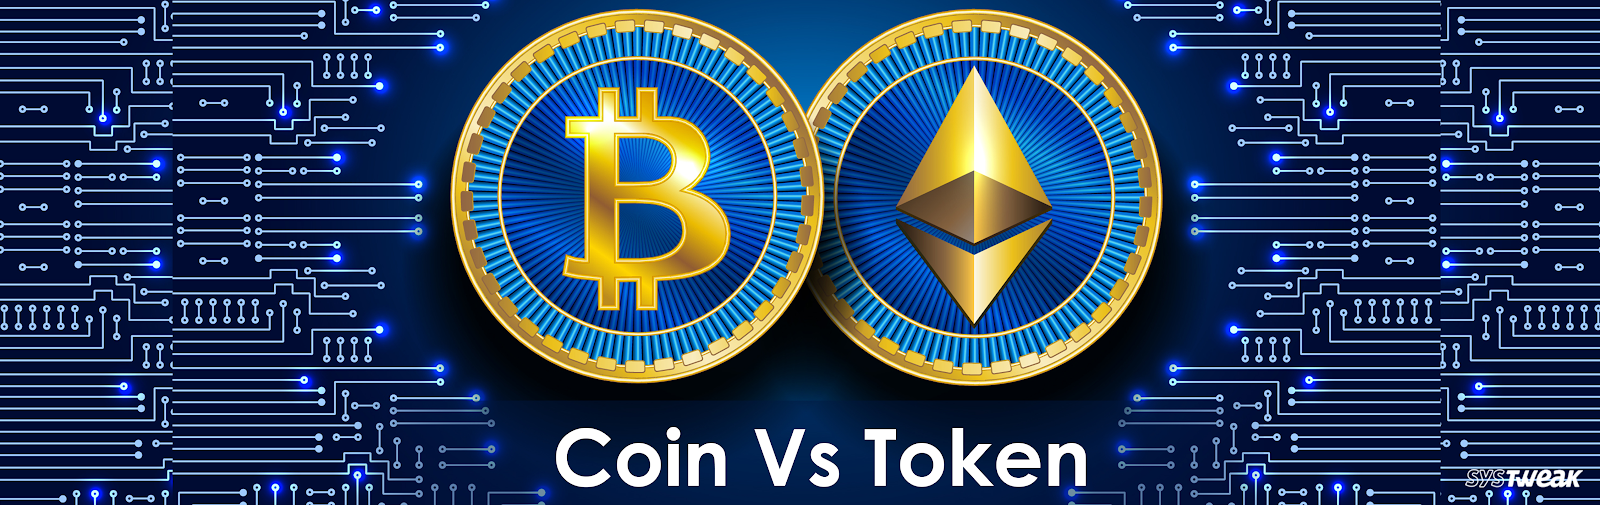 The differences between cryptocurrency coins and tokens